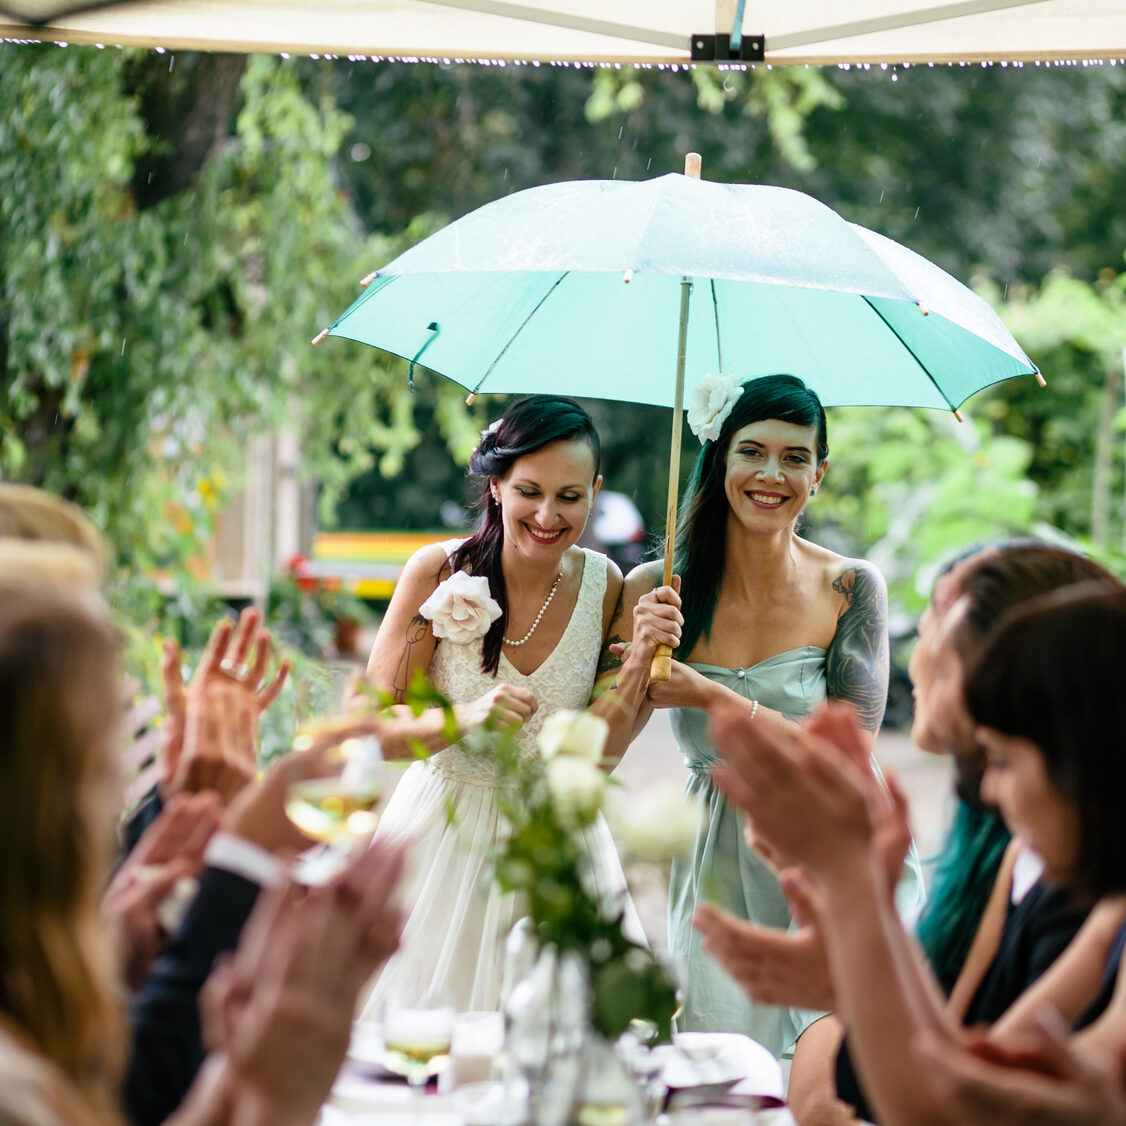 Lesbian Couple with umbrella during wedding reception